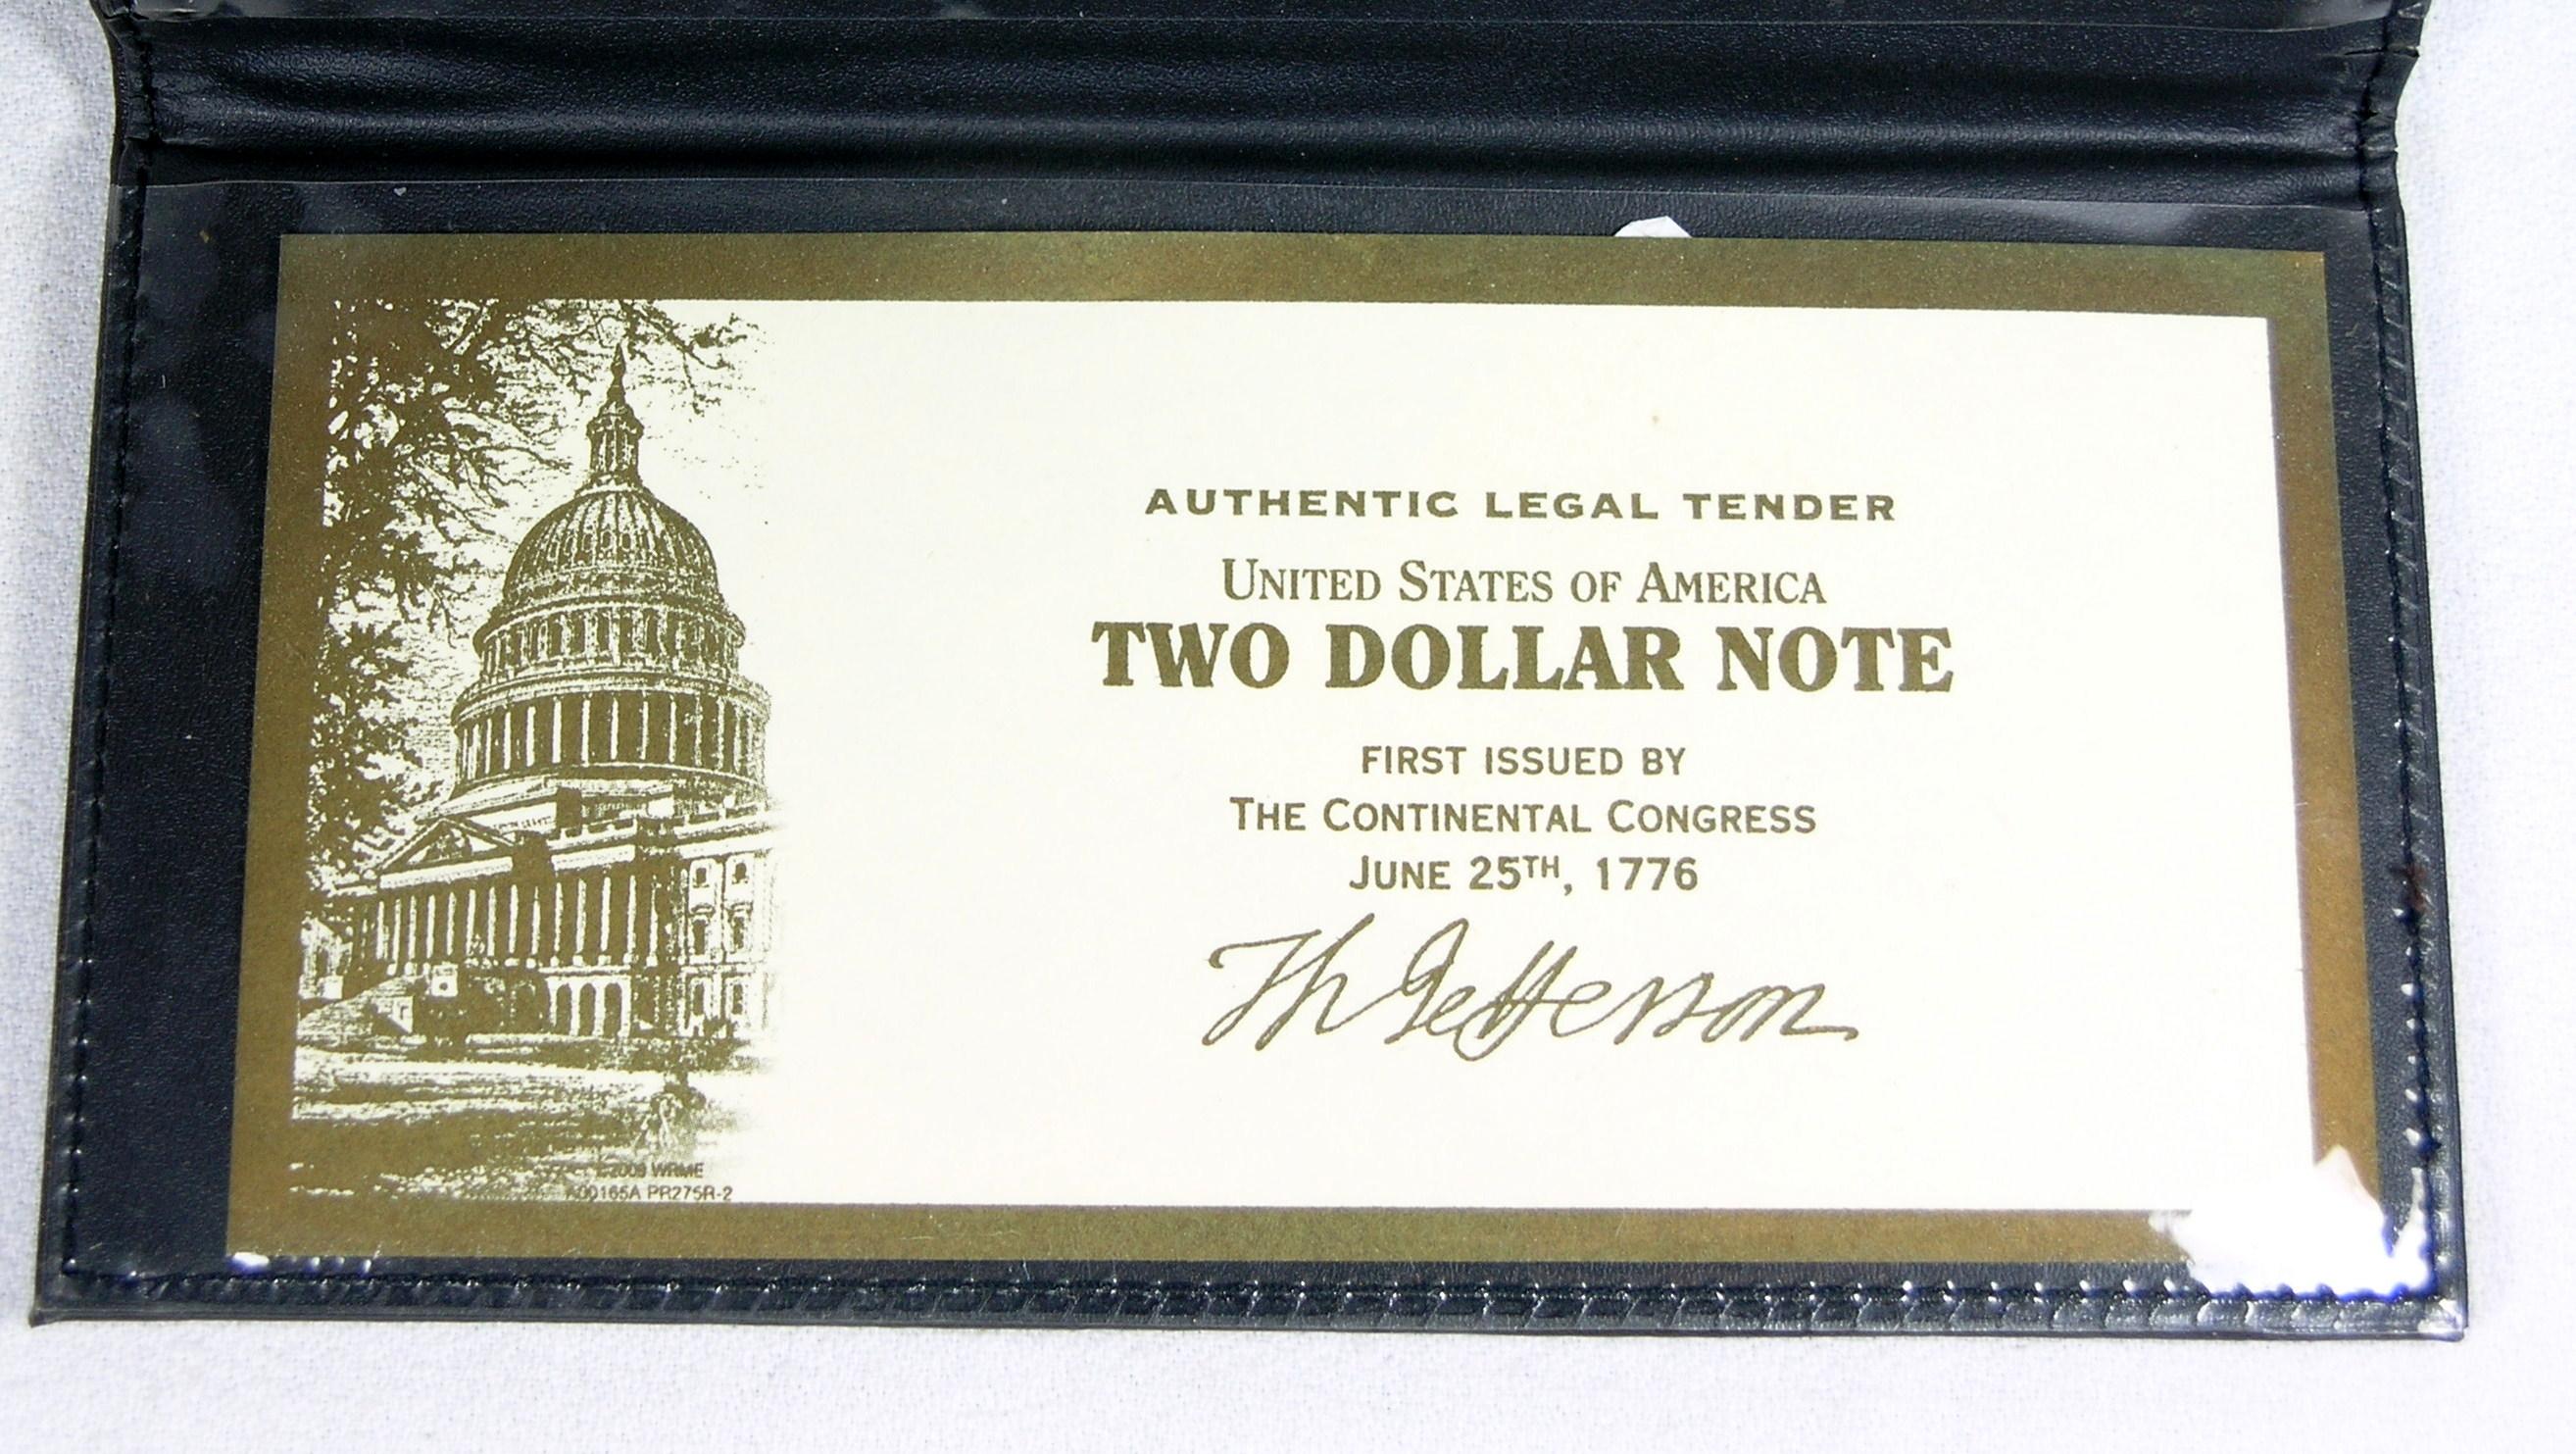 2003 United States Authentic Legal Tender $2 Note. Commemorating the $2 Bil